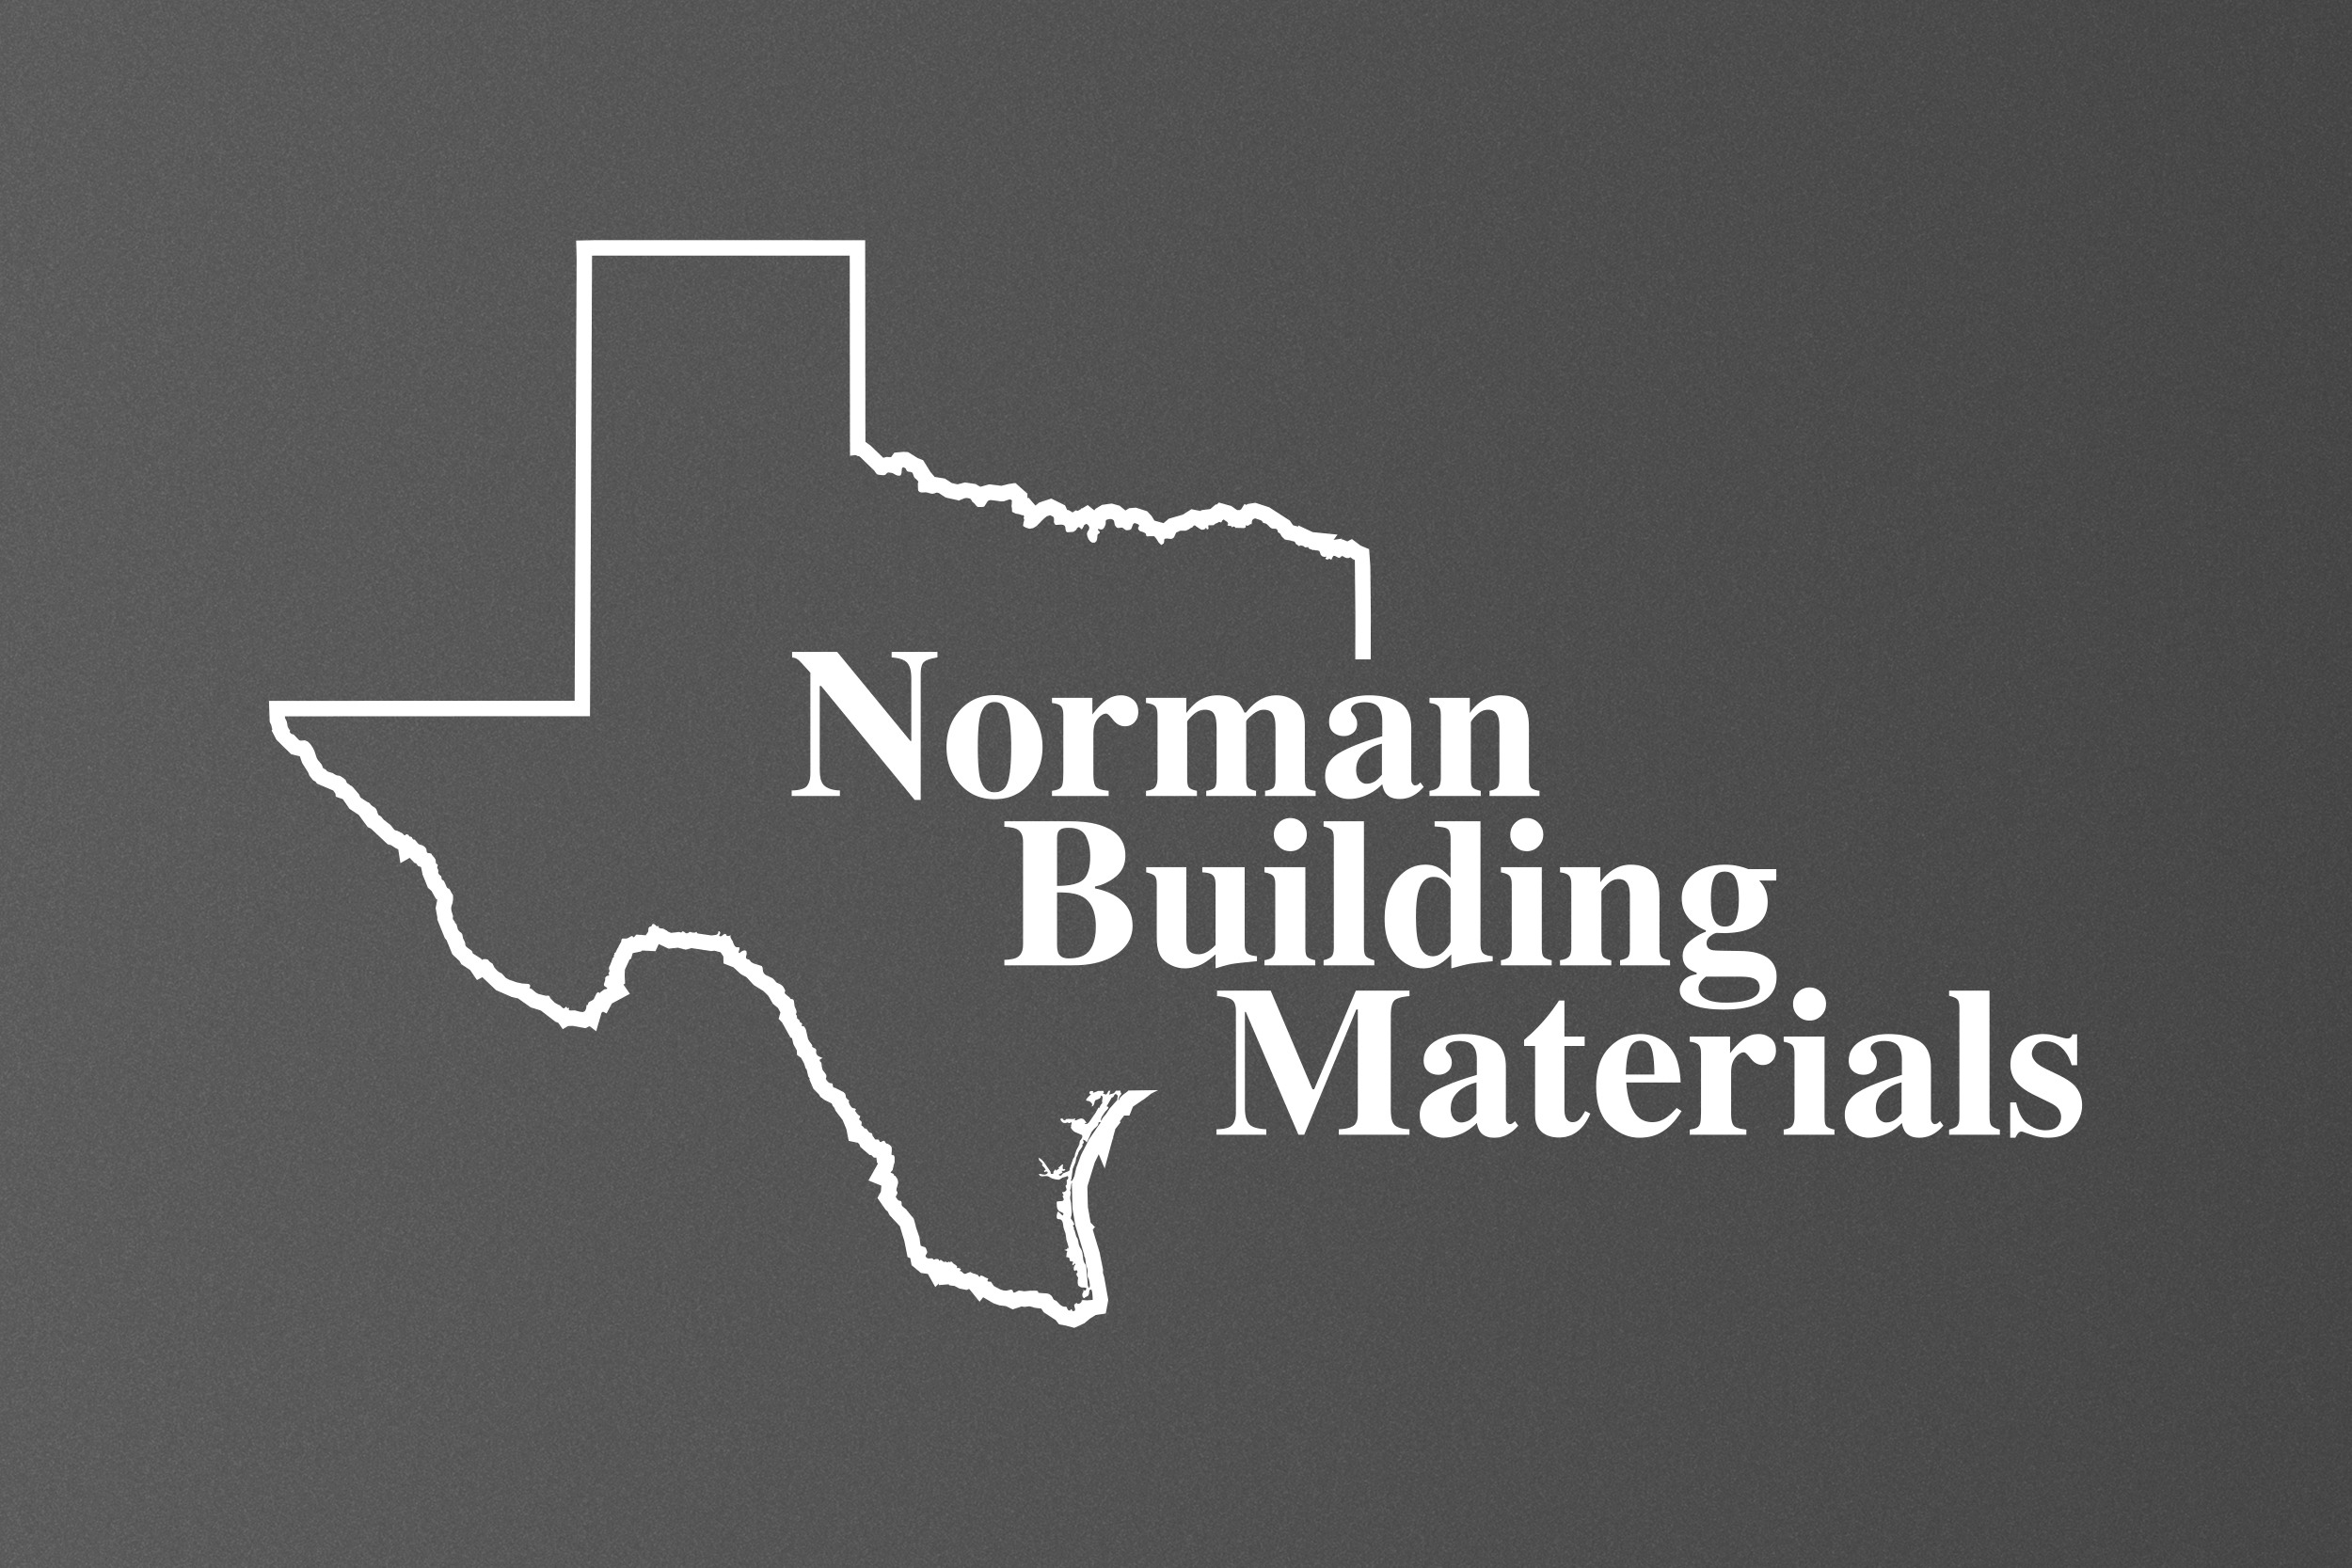 Read our comprehensive review of Norman Building Materials, a trusted provider of building materials and construction supplies. Discover their commitment to quality products, expert knowledge, and exceptional customer service. Partner with Gott Marketing for all your building material needs and marketing solutions.